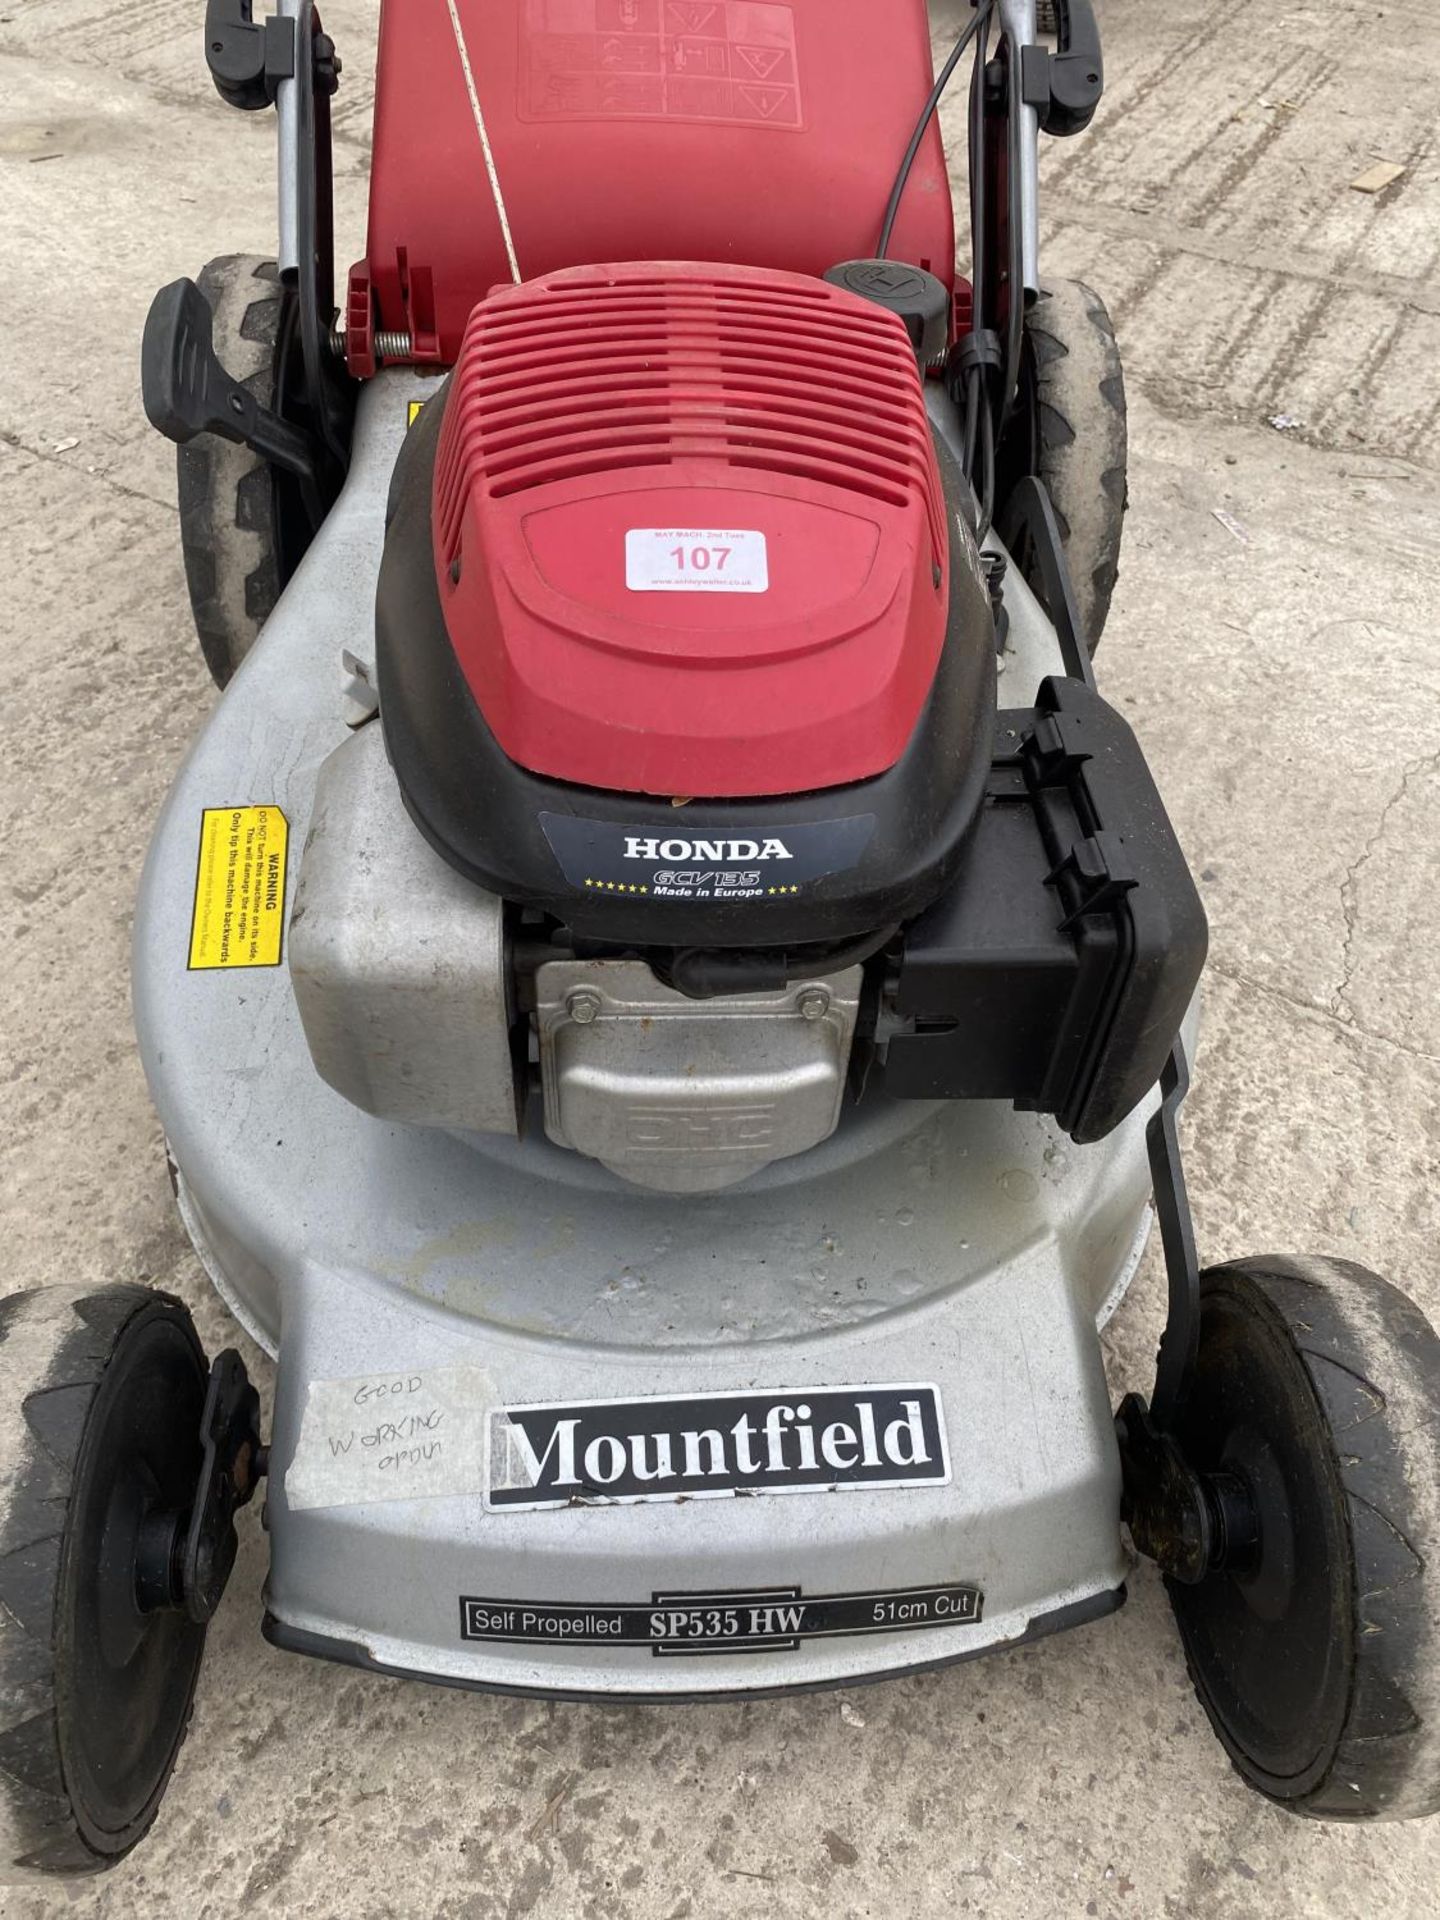 MOUNTFIELD 21" SELF PROPELLED LAWN MOWER WITH HONDA ENGINE & GRASS BOX NO VAT - Image 3 of 5